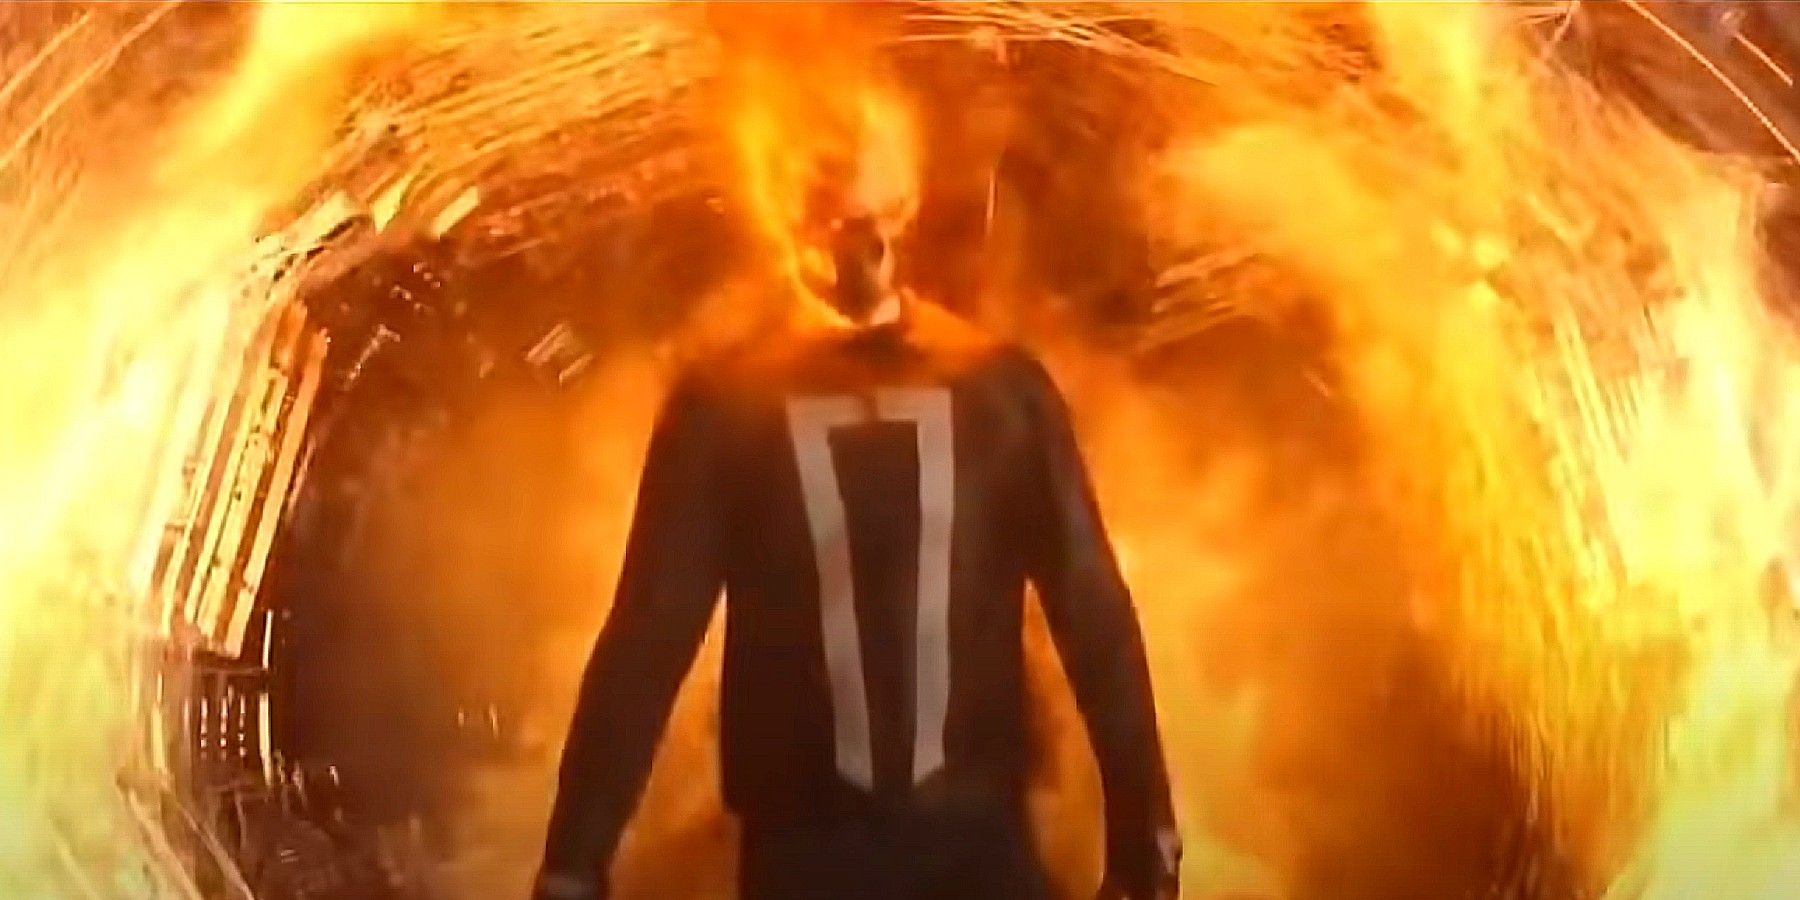 Ghost Rider comes through a portal in Avengers Endgame